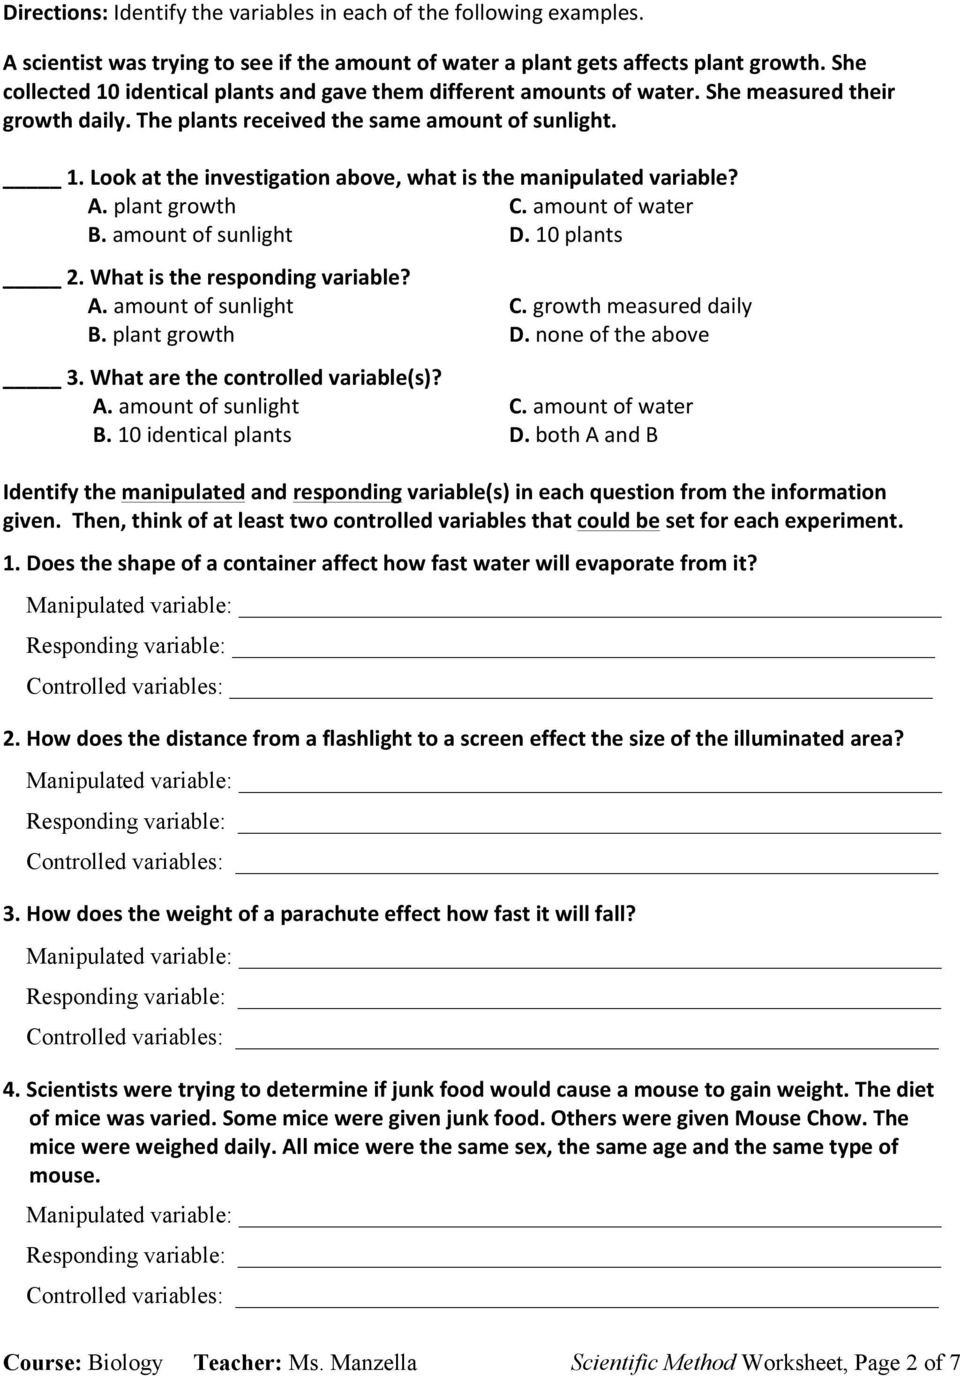 Identifying Variables Worksheet Answers Classwork Scientific Method Practice Variables Hypothesis